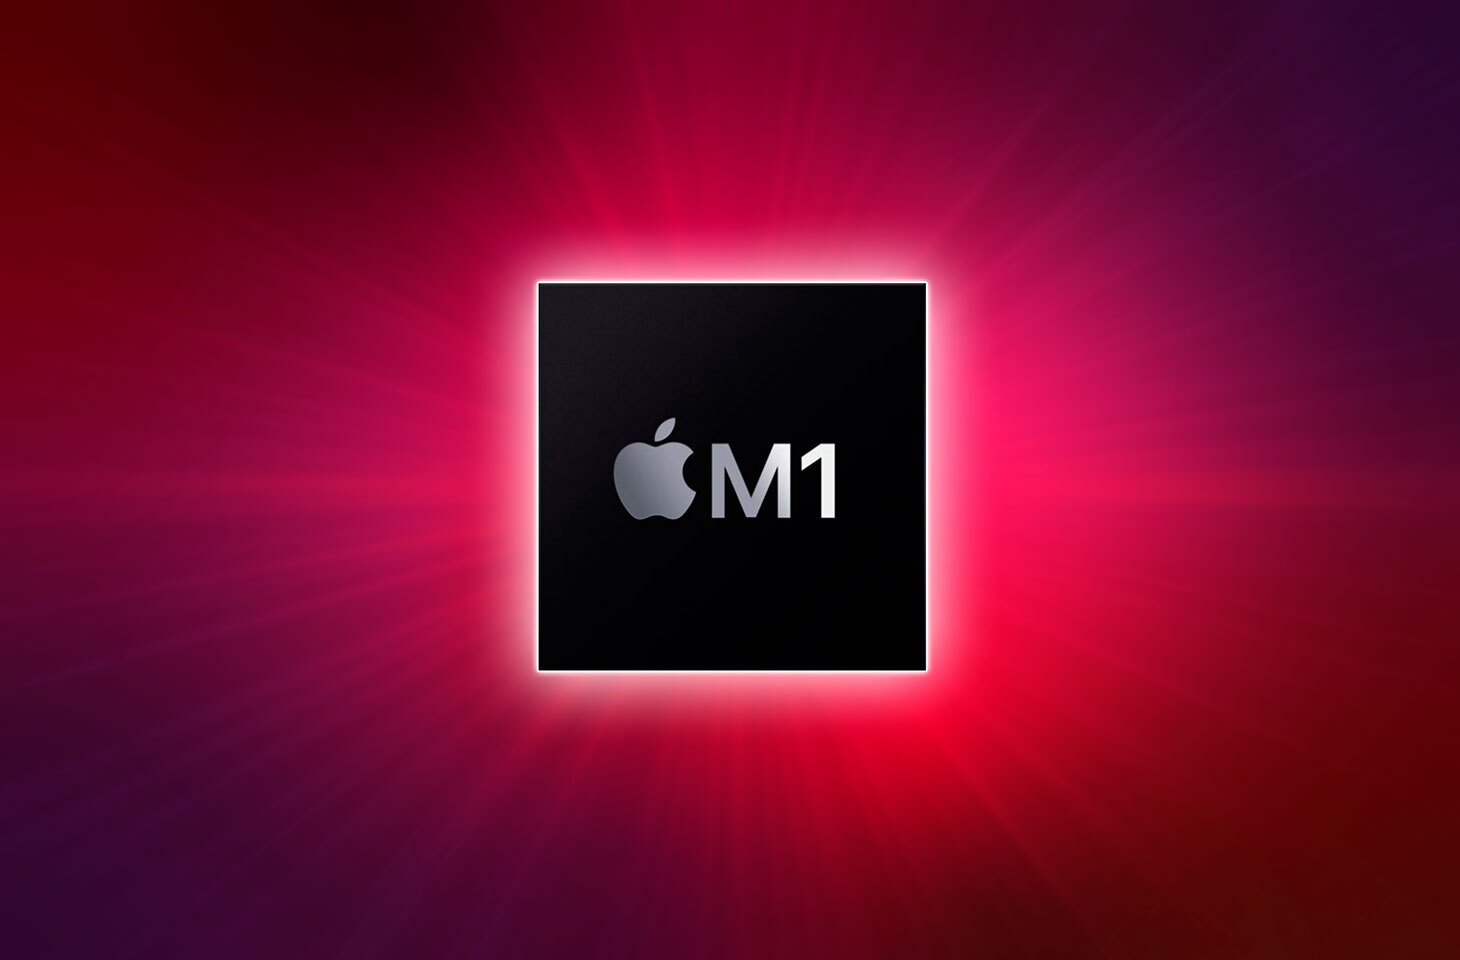 What's new in the malware adapted for the Apple M1, is this malware dangerous, and how you can protect yourself from it